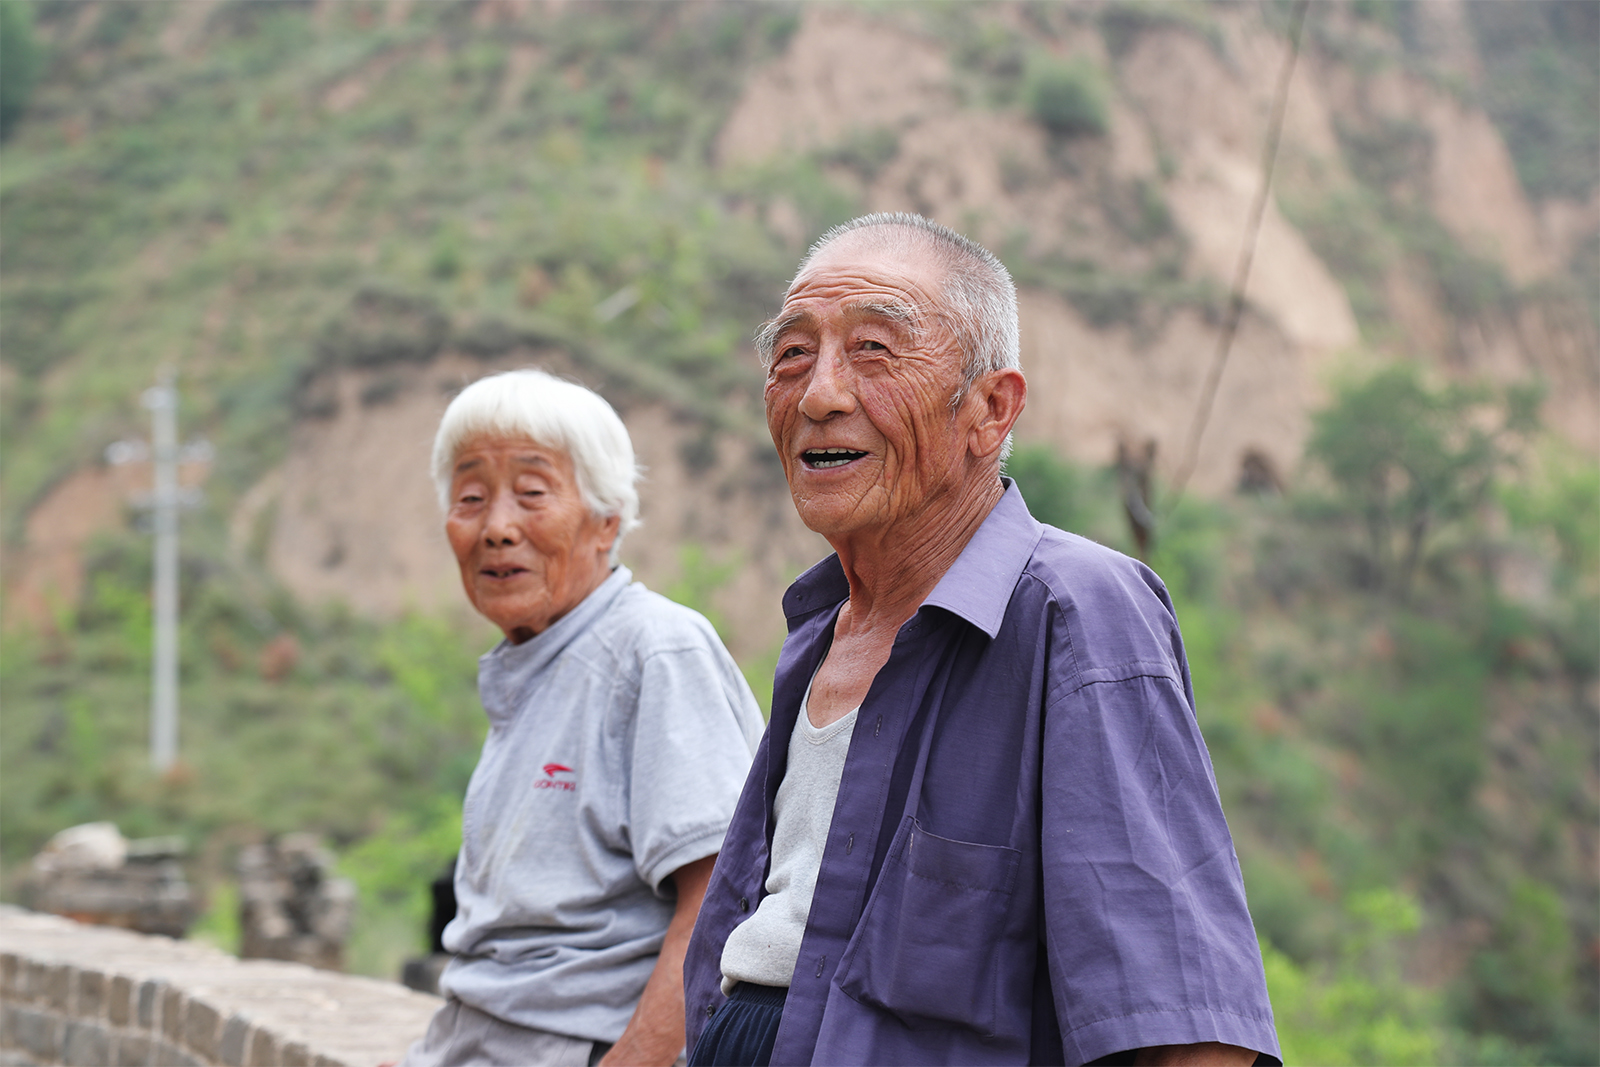 Residents of Zhangjiata Village smile while chatting with each other. /CGTN